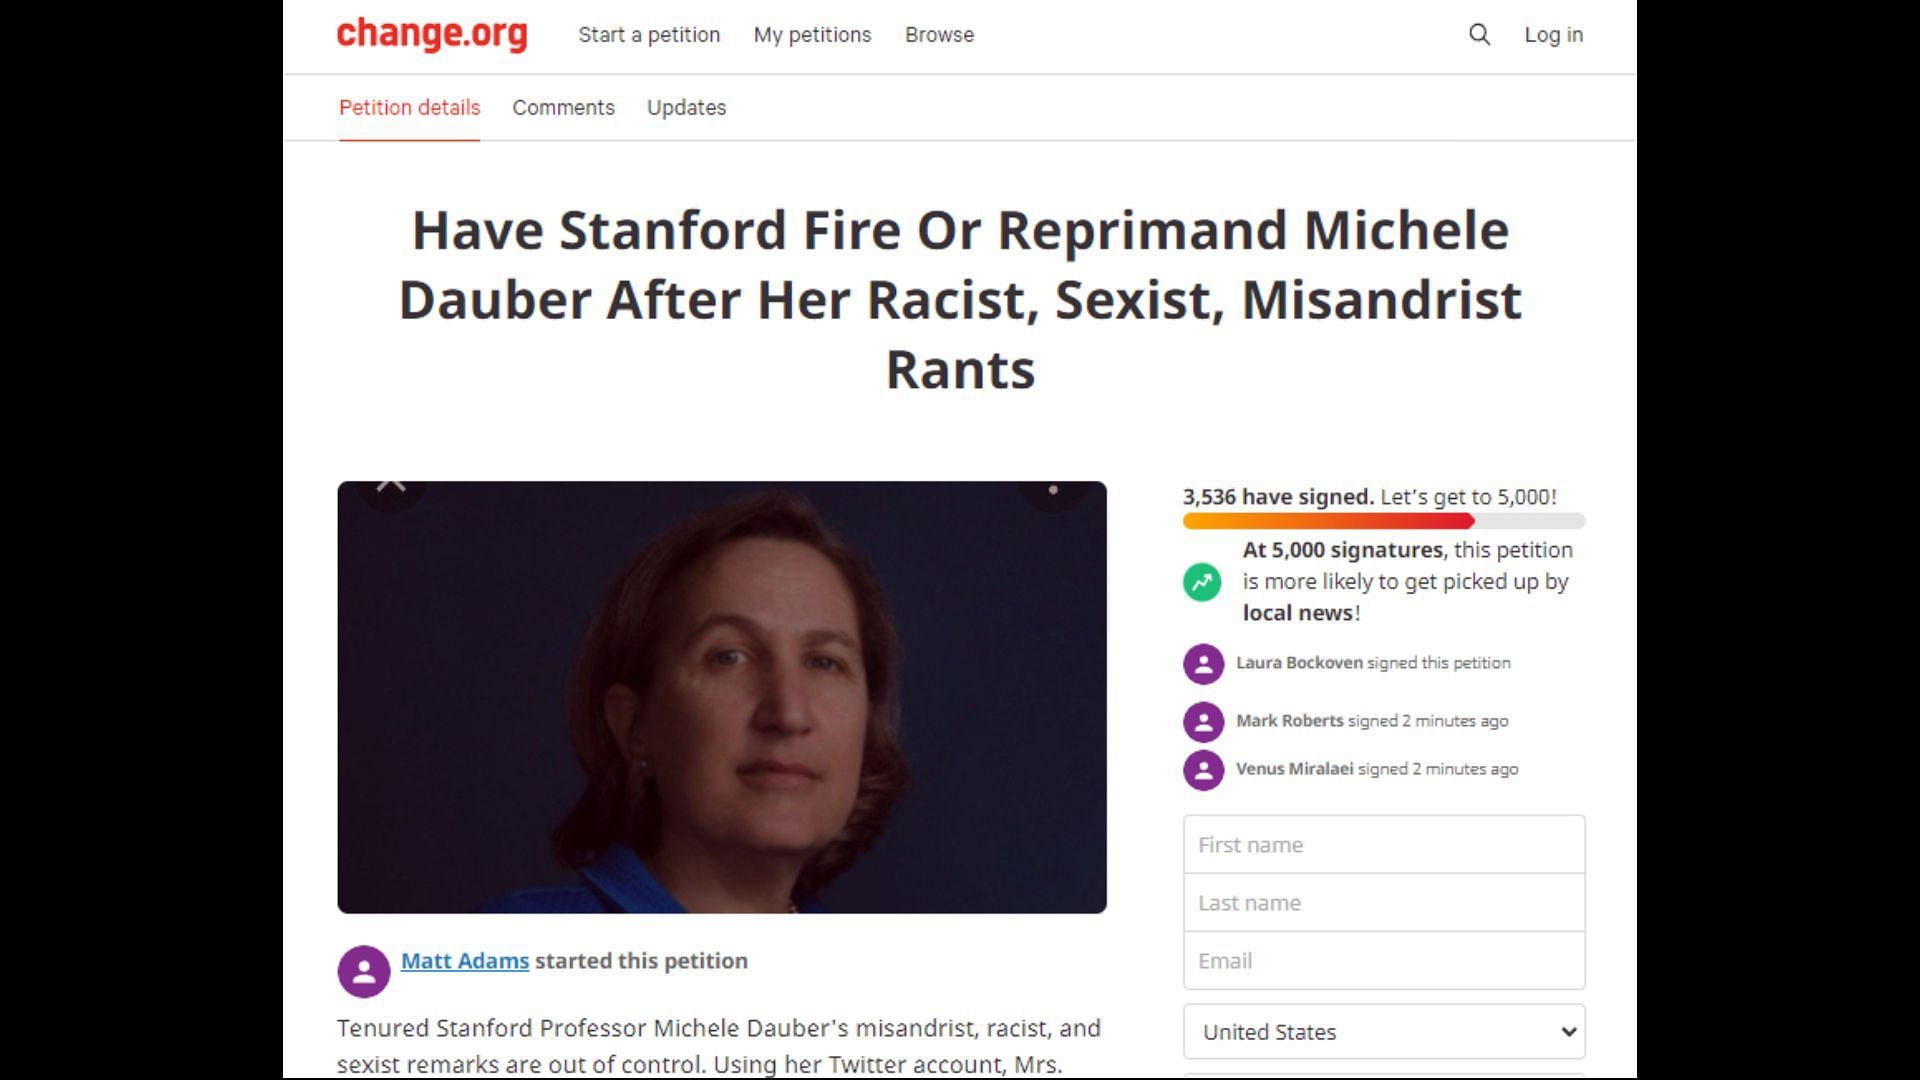 Screenshot of Change.org petition to remove Michele Dauber from Stanford University.